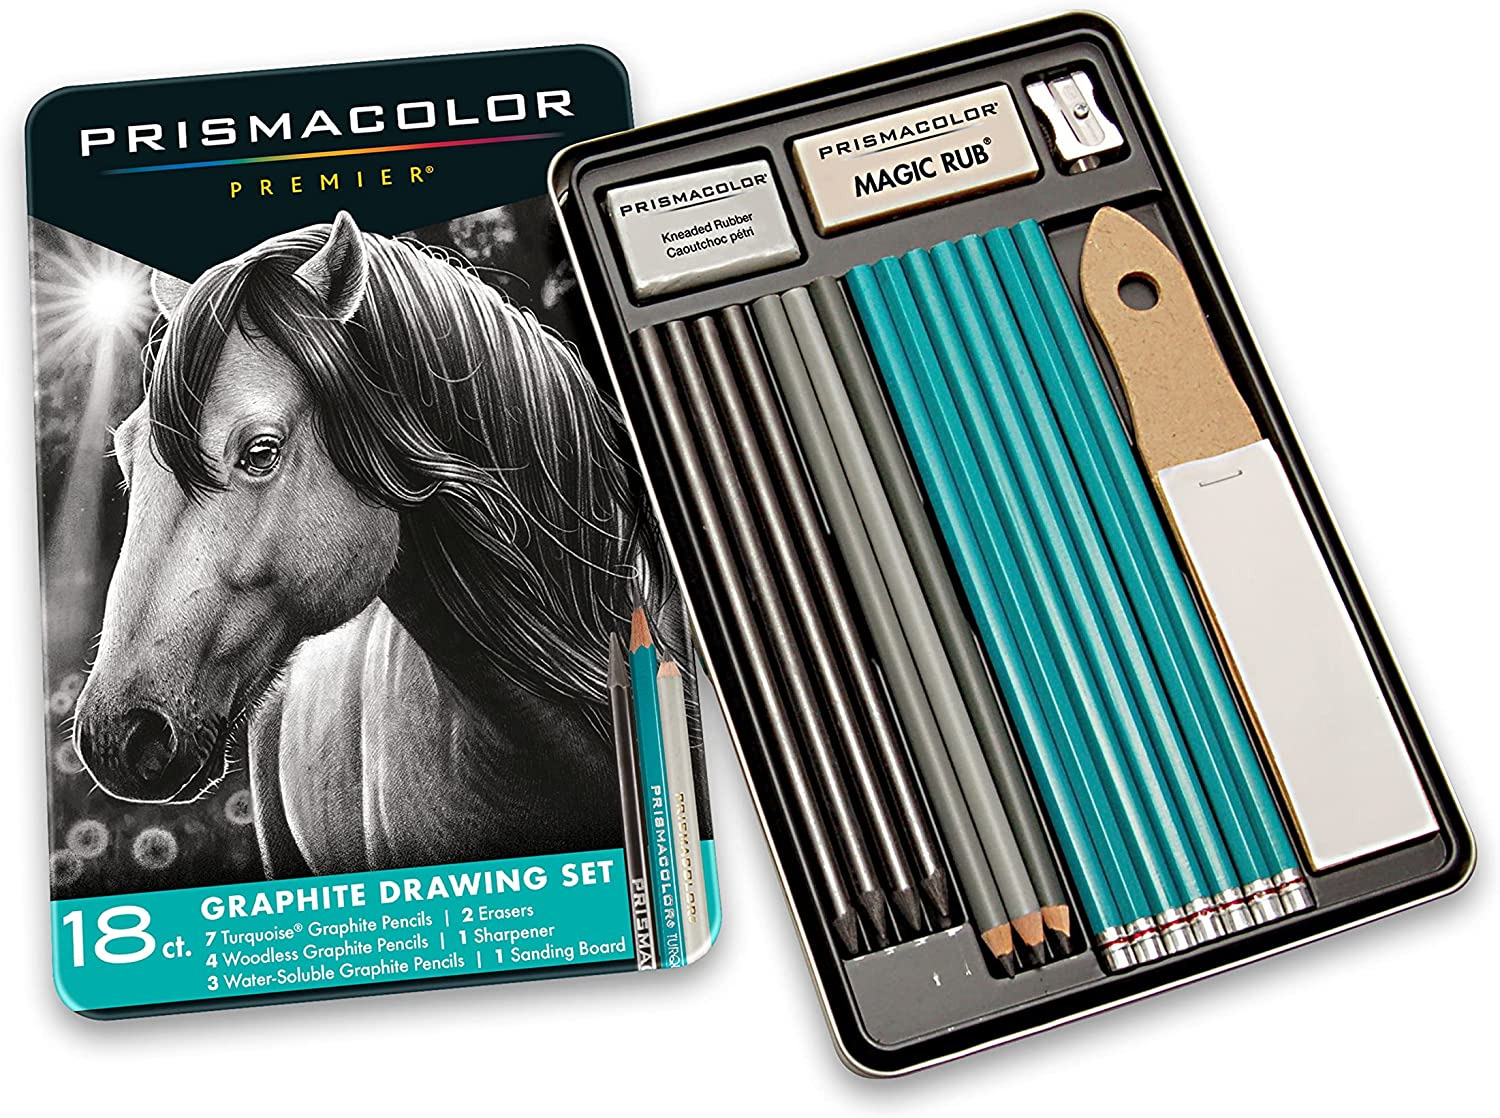 Prismacolor Premier Graphite Drawing Pencils with Erasers & Sharpeners, Adult